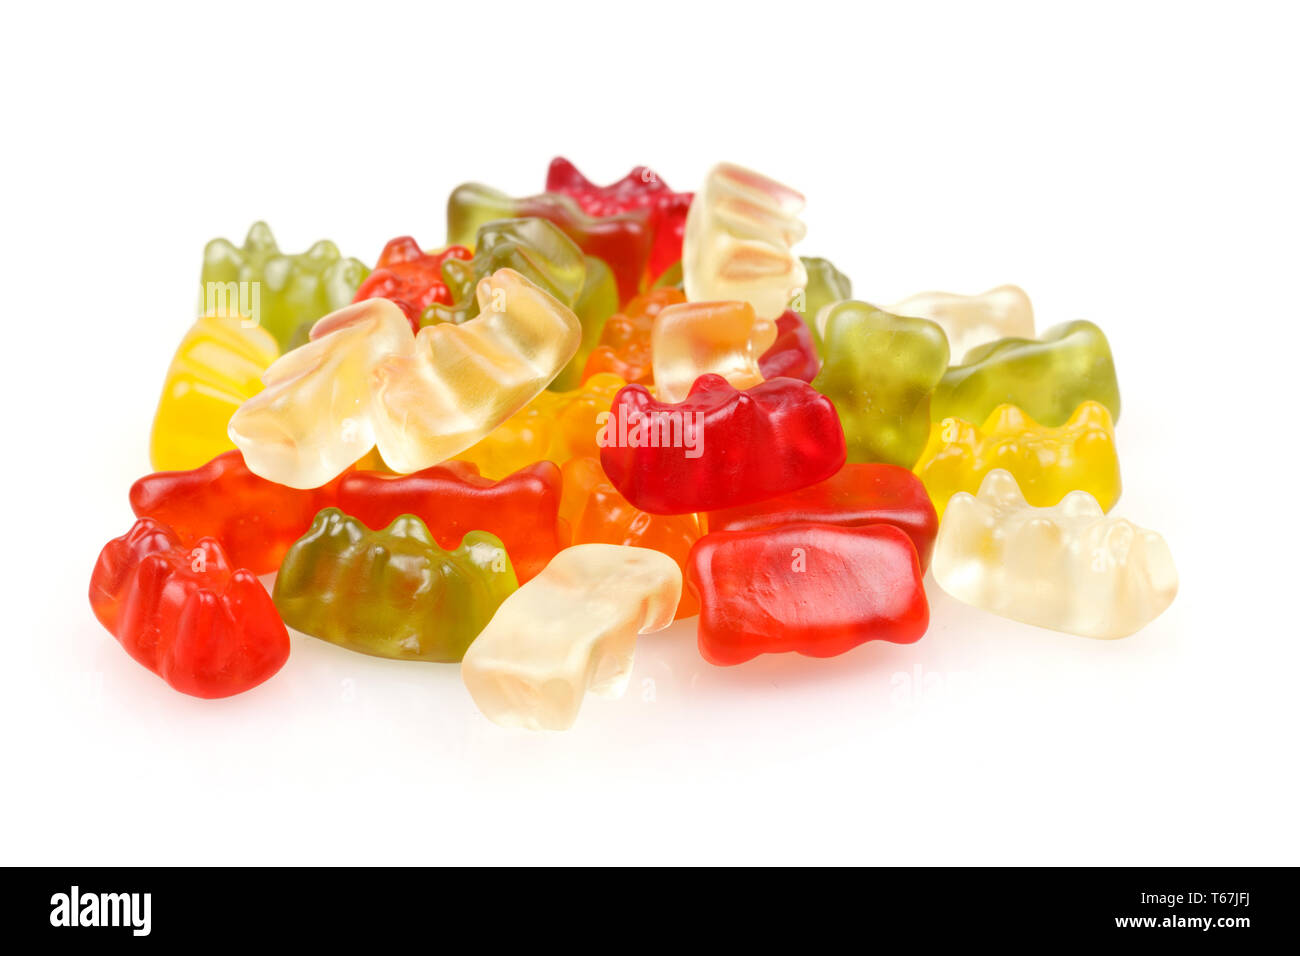 Gummy bears, Colorful jelly bear candies set Stock Photo